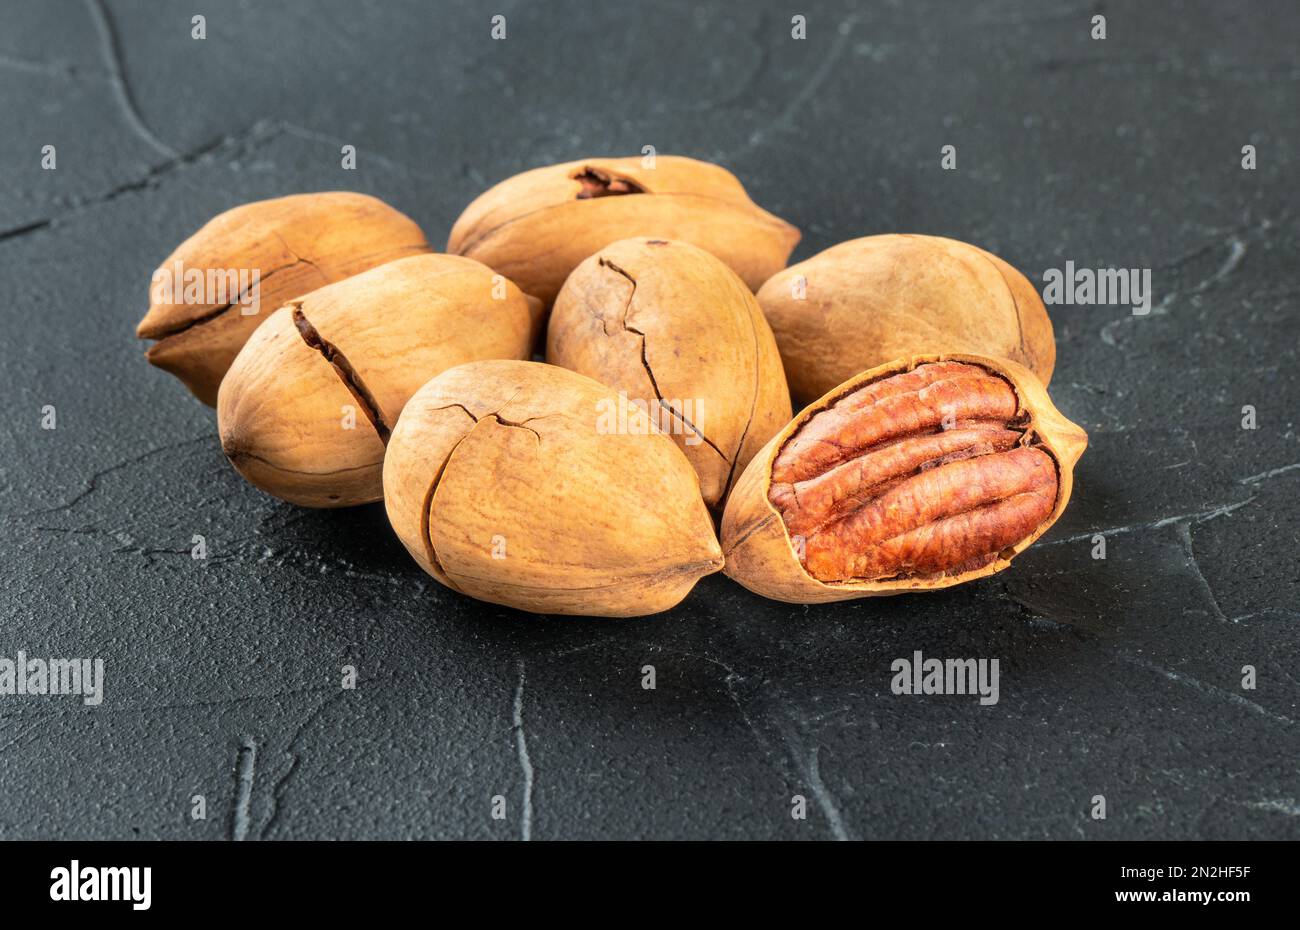 Small pile of inshell pecans close up on a dark background Stock Photo